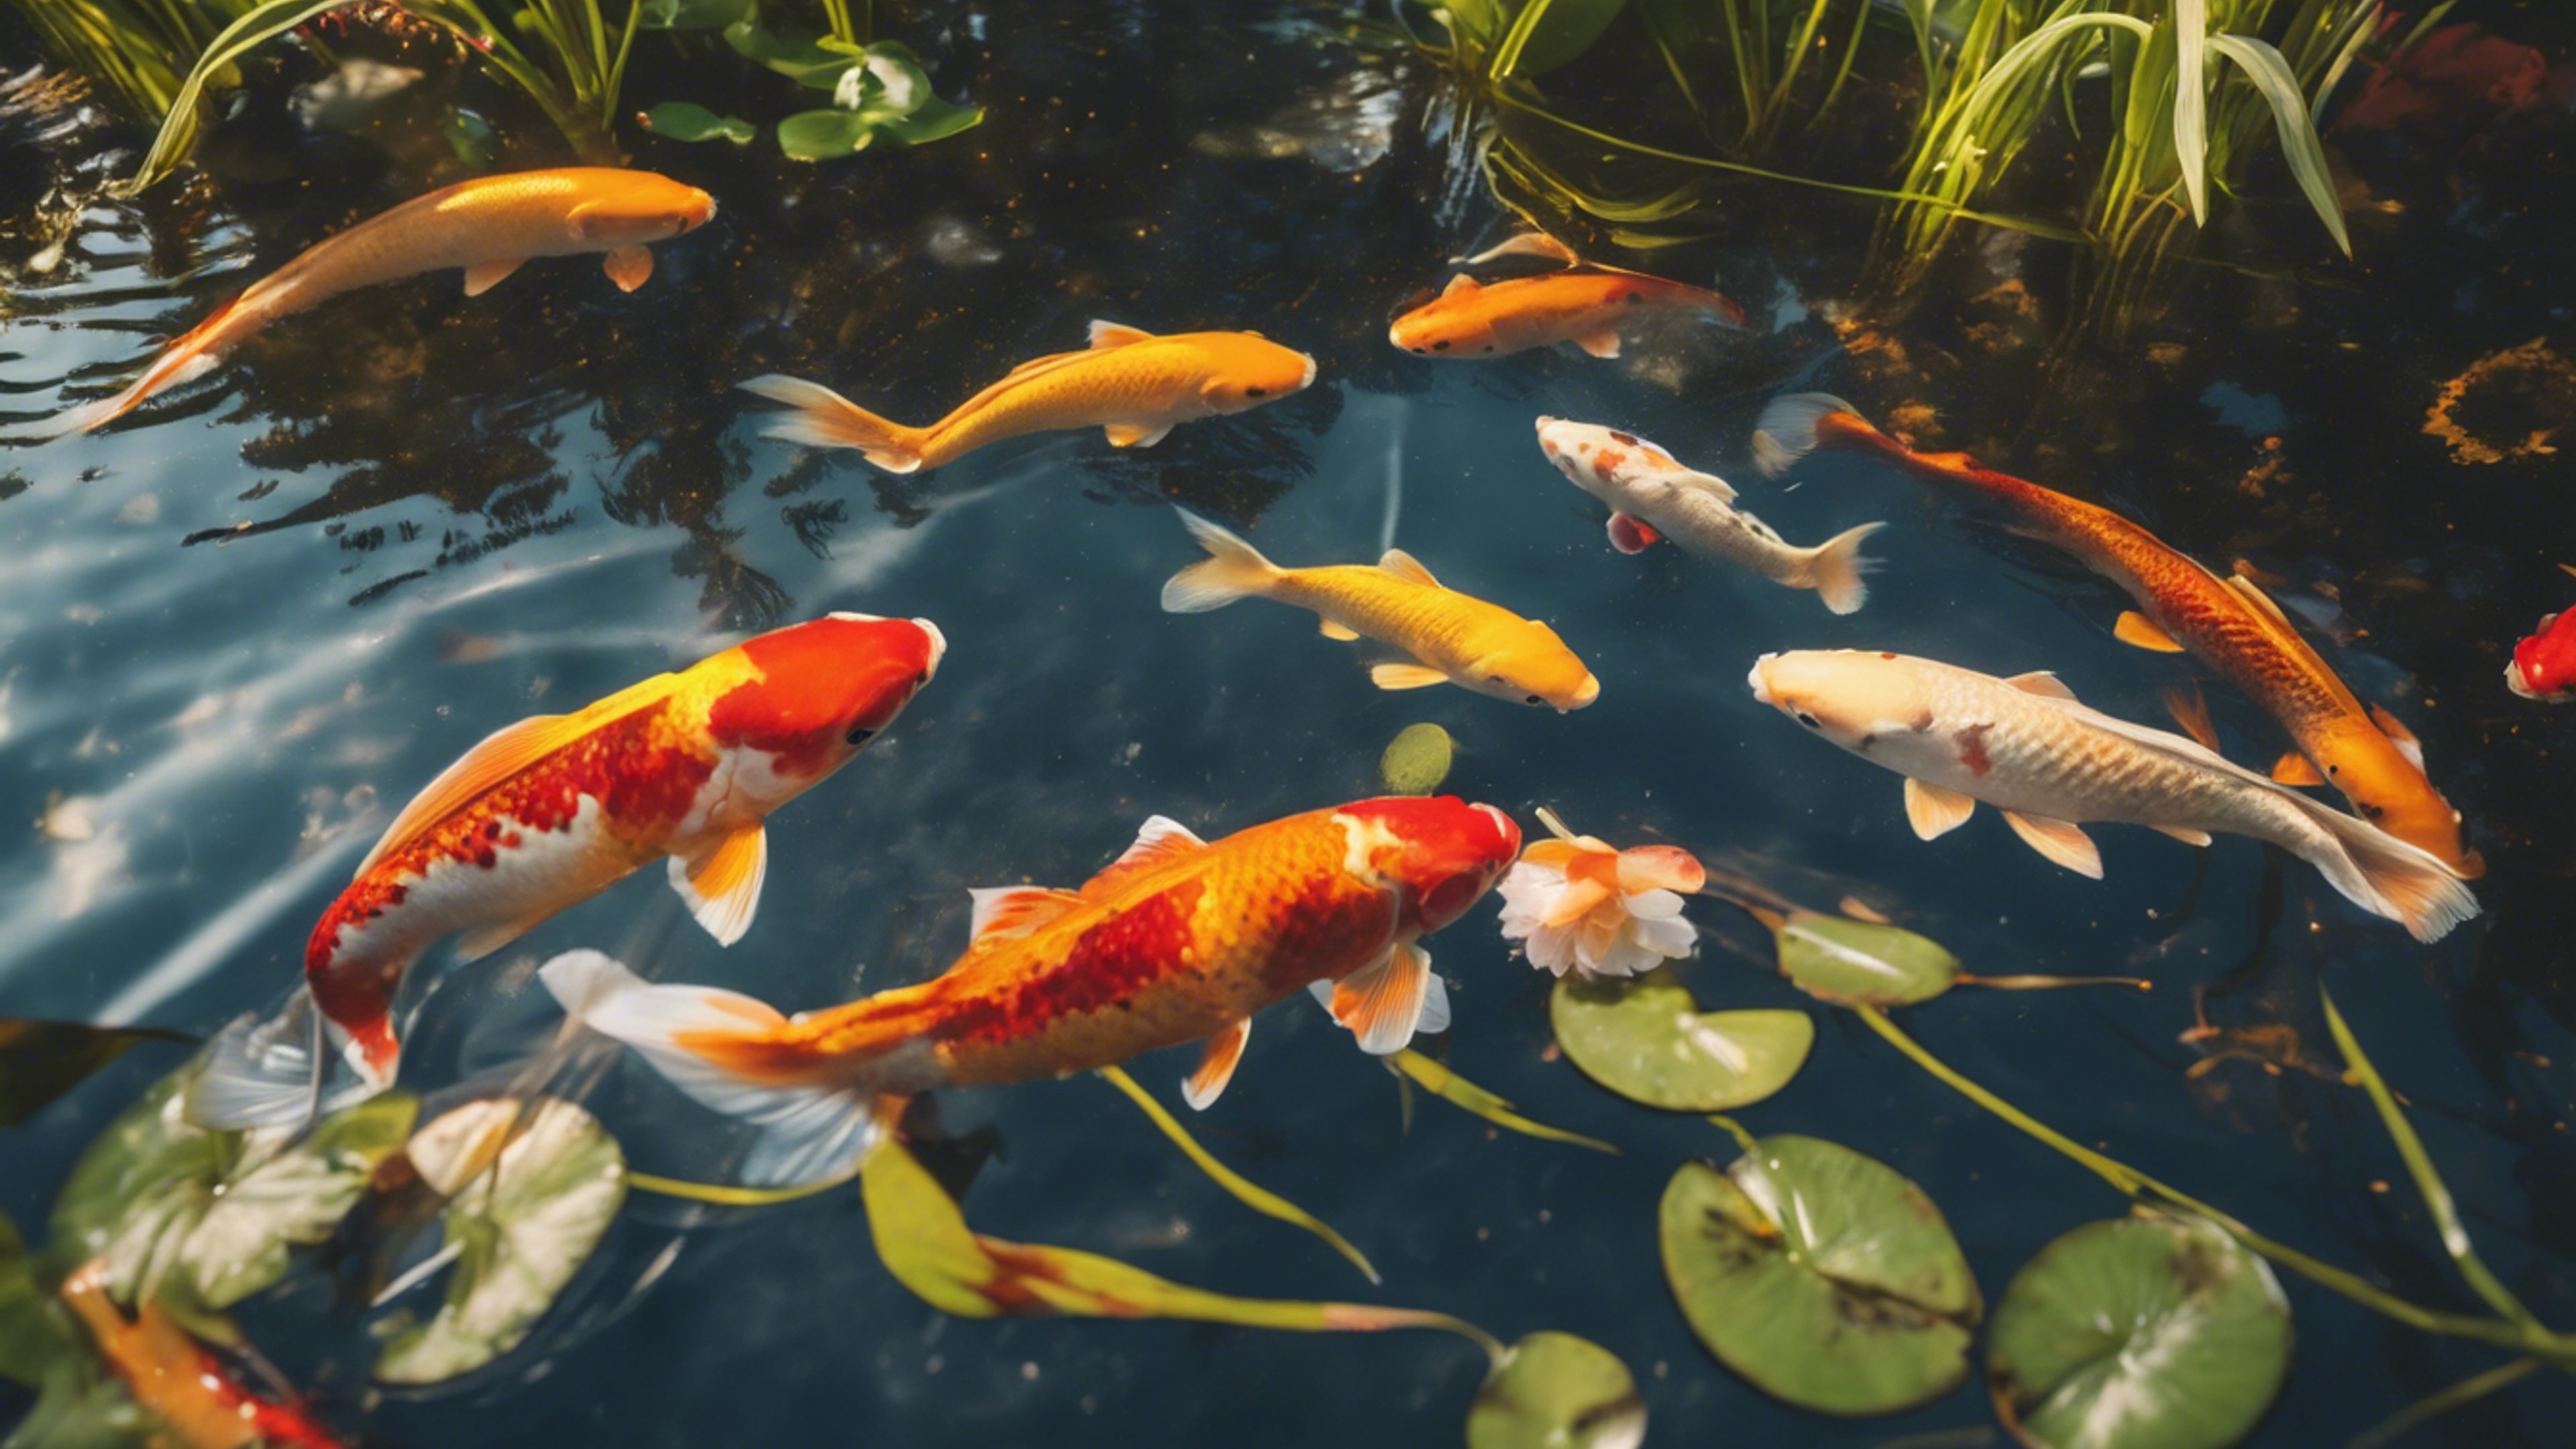 A koi pond with fish swirling under the lilies, their cool red and vibrant yellow scales shimmering under the sun. Tapéta[e1c53d91cfb64fffb364]